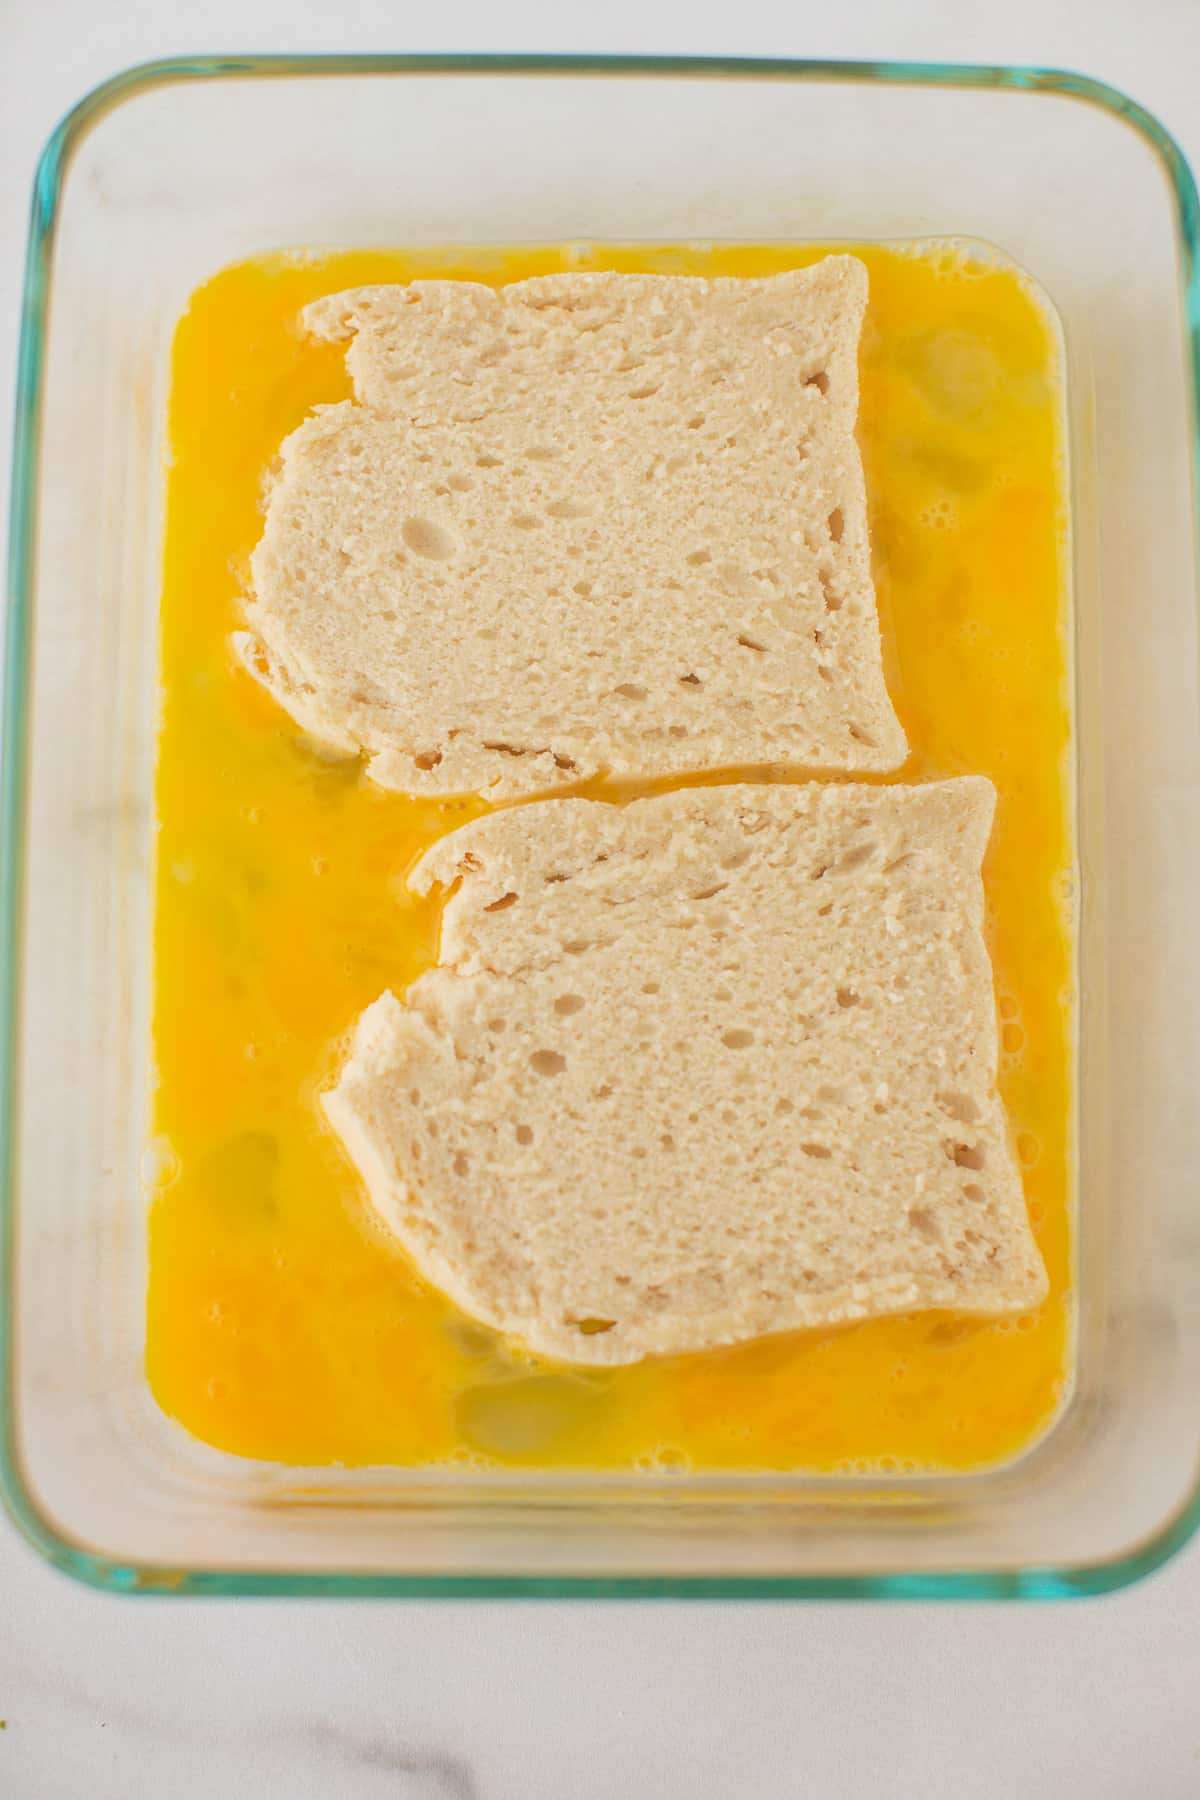 bread soaking in egg mixture for french toast